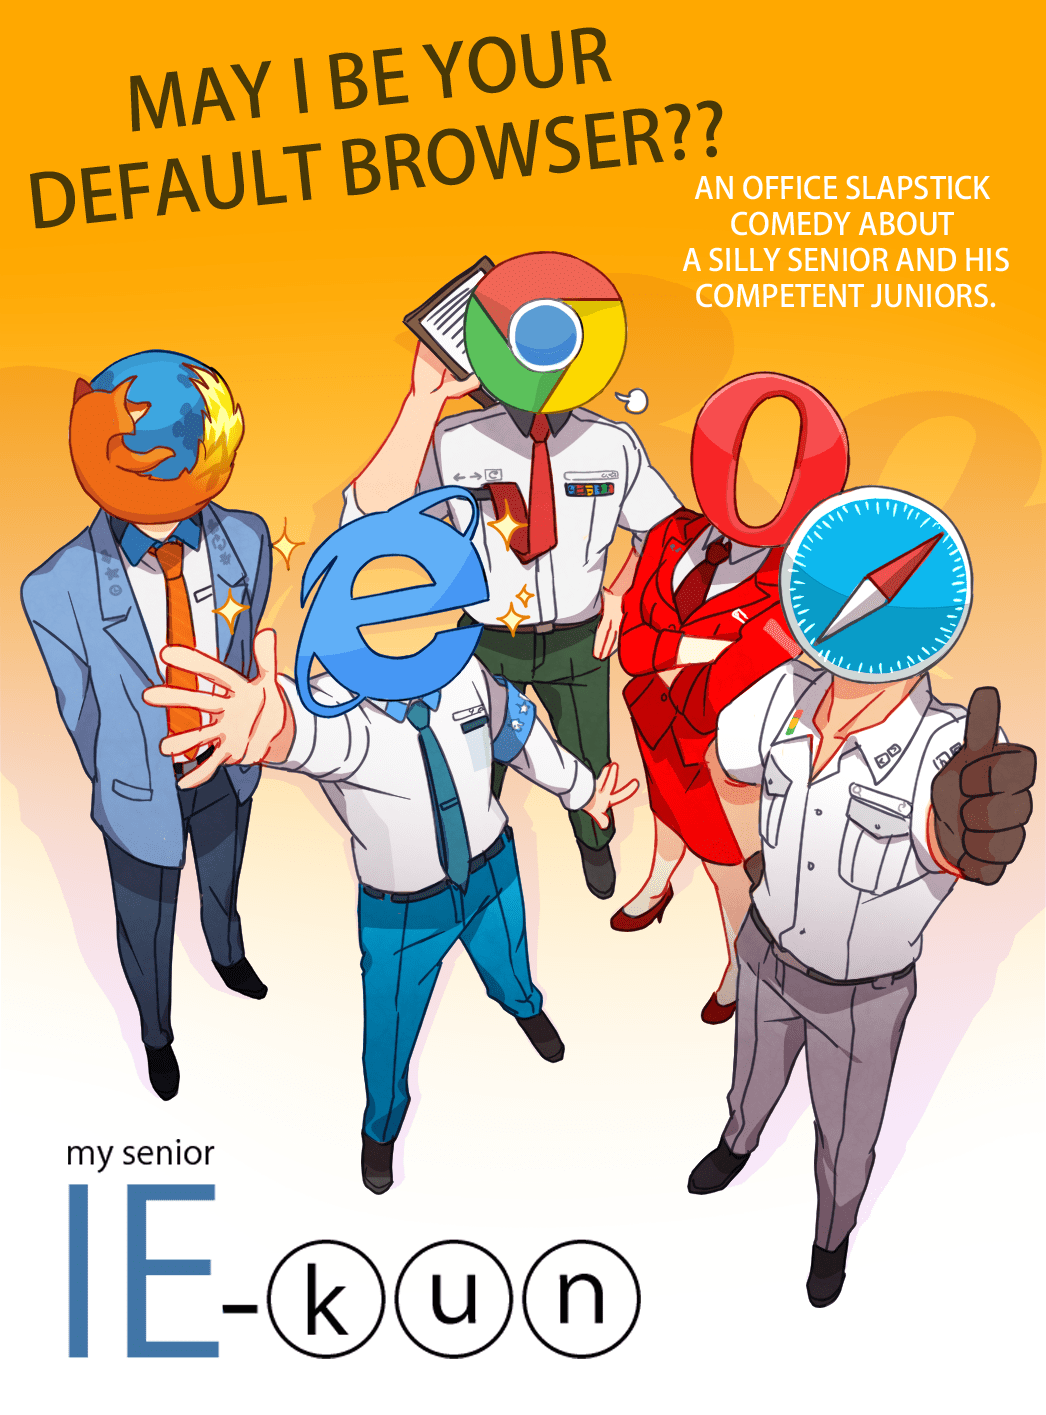 Internet Browsers, Personified